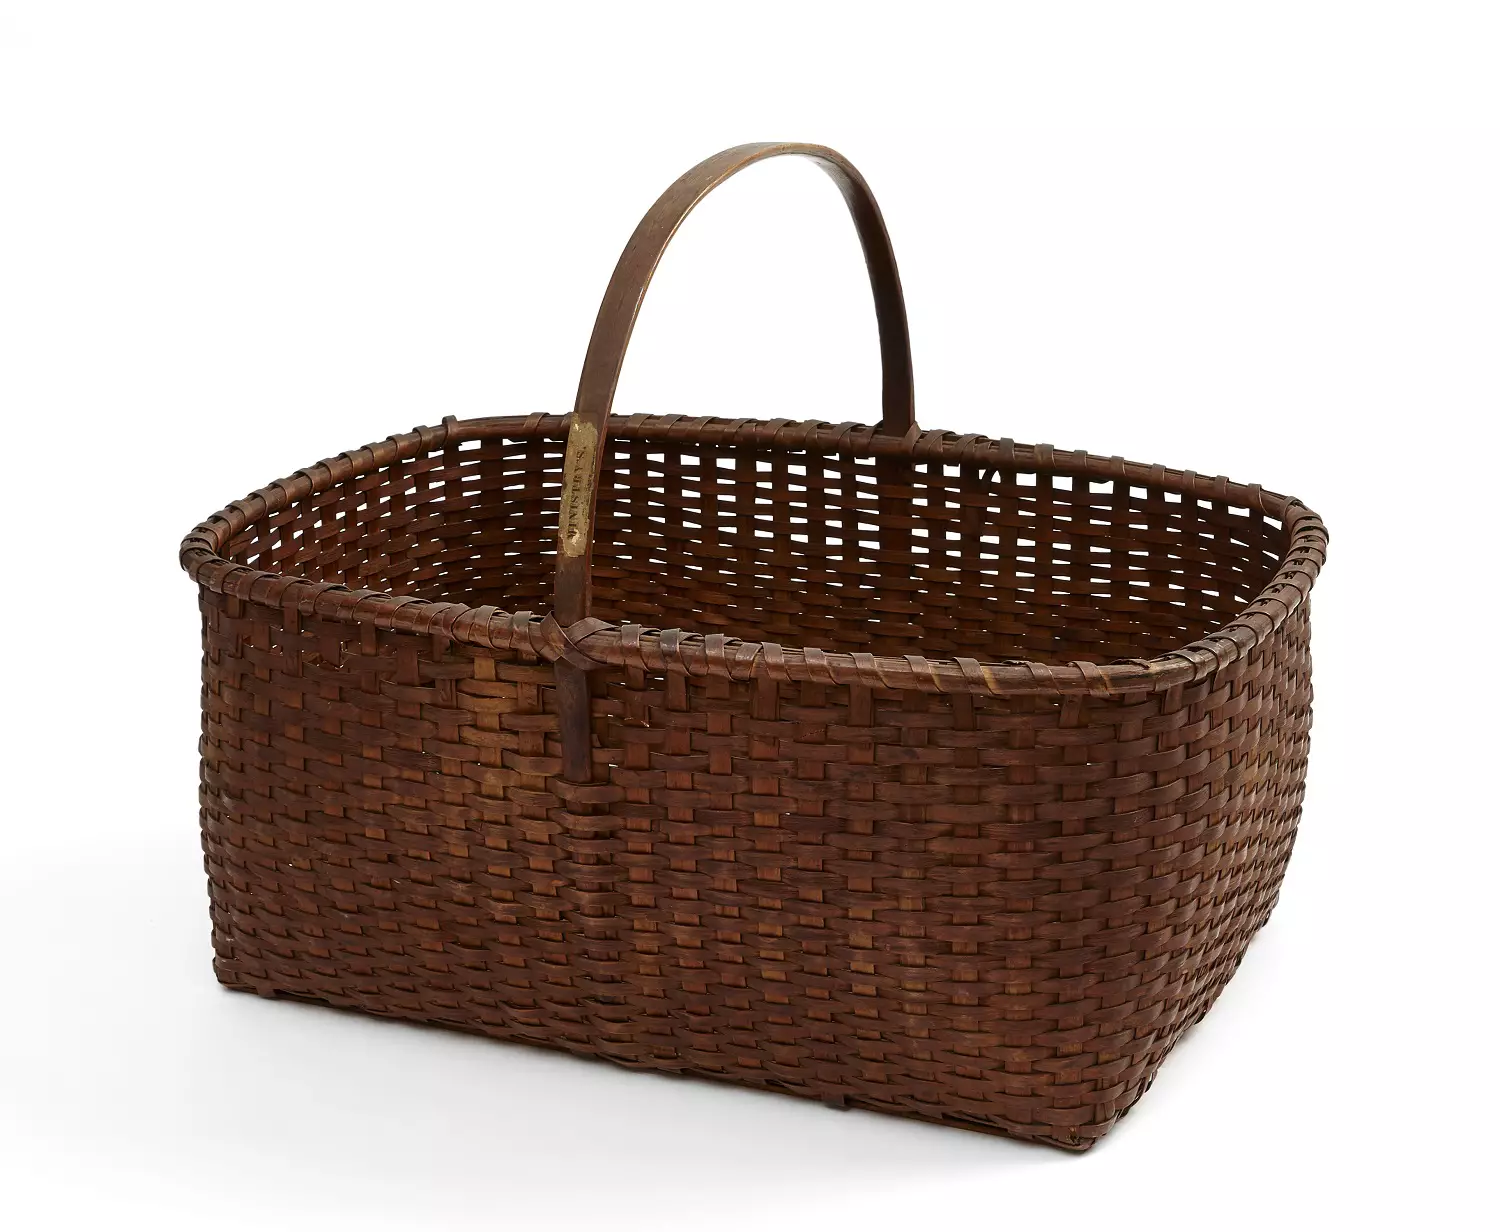 A brown wicker basket on a white background.